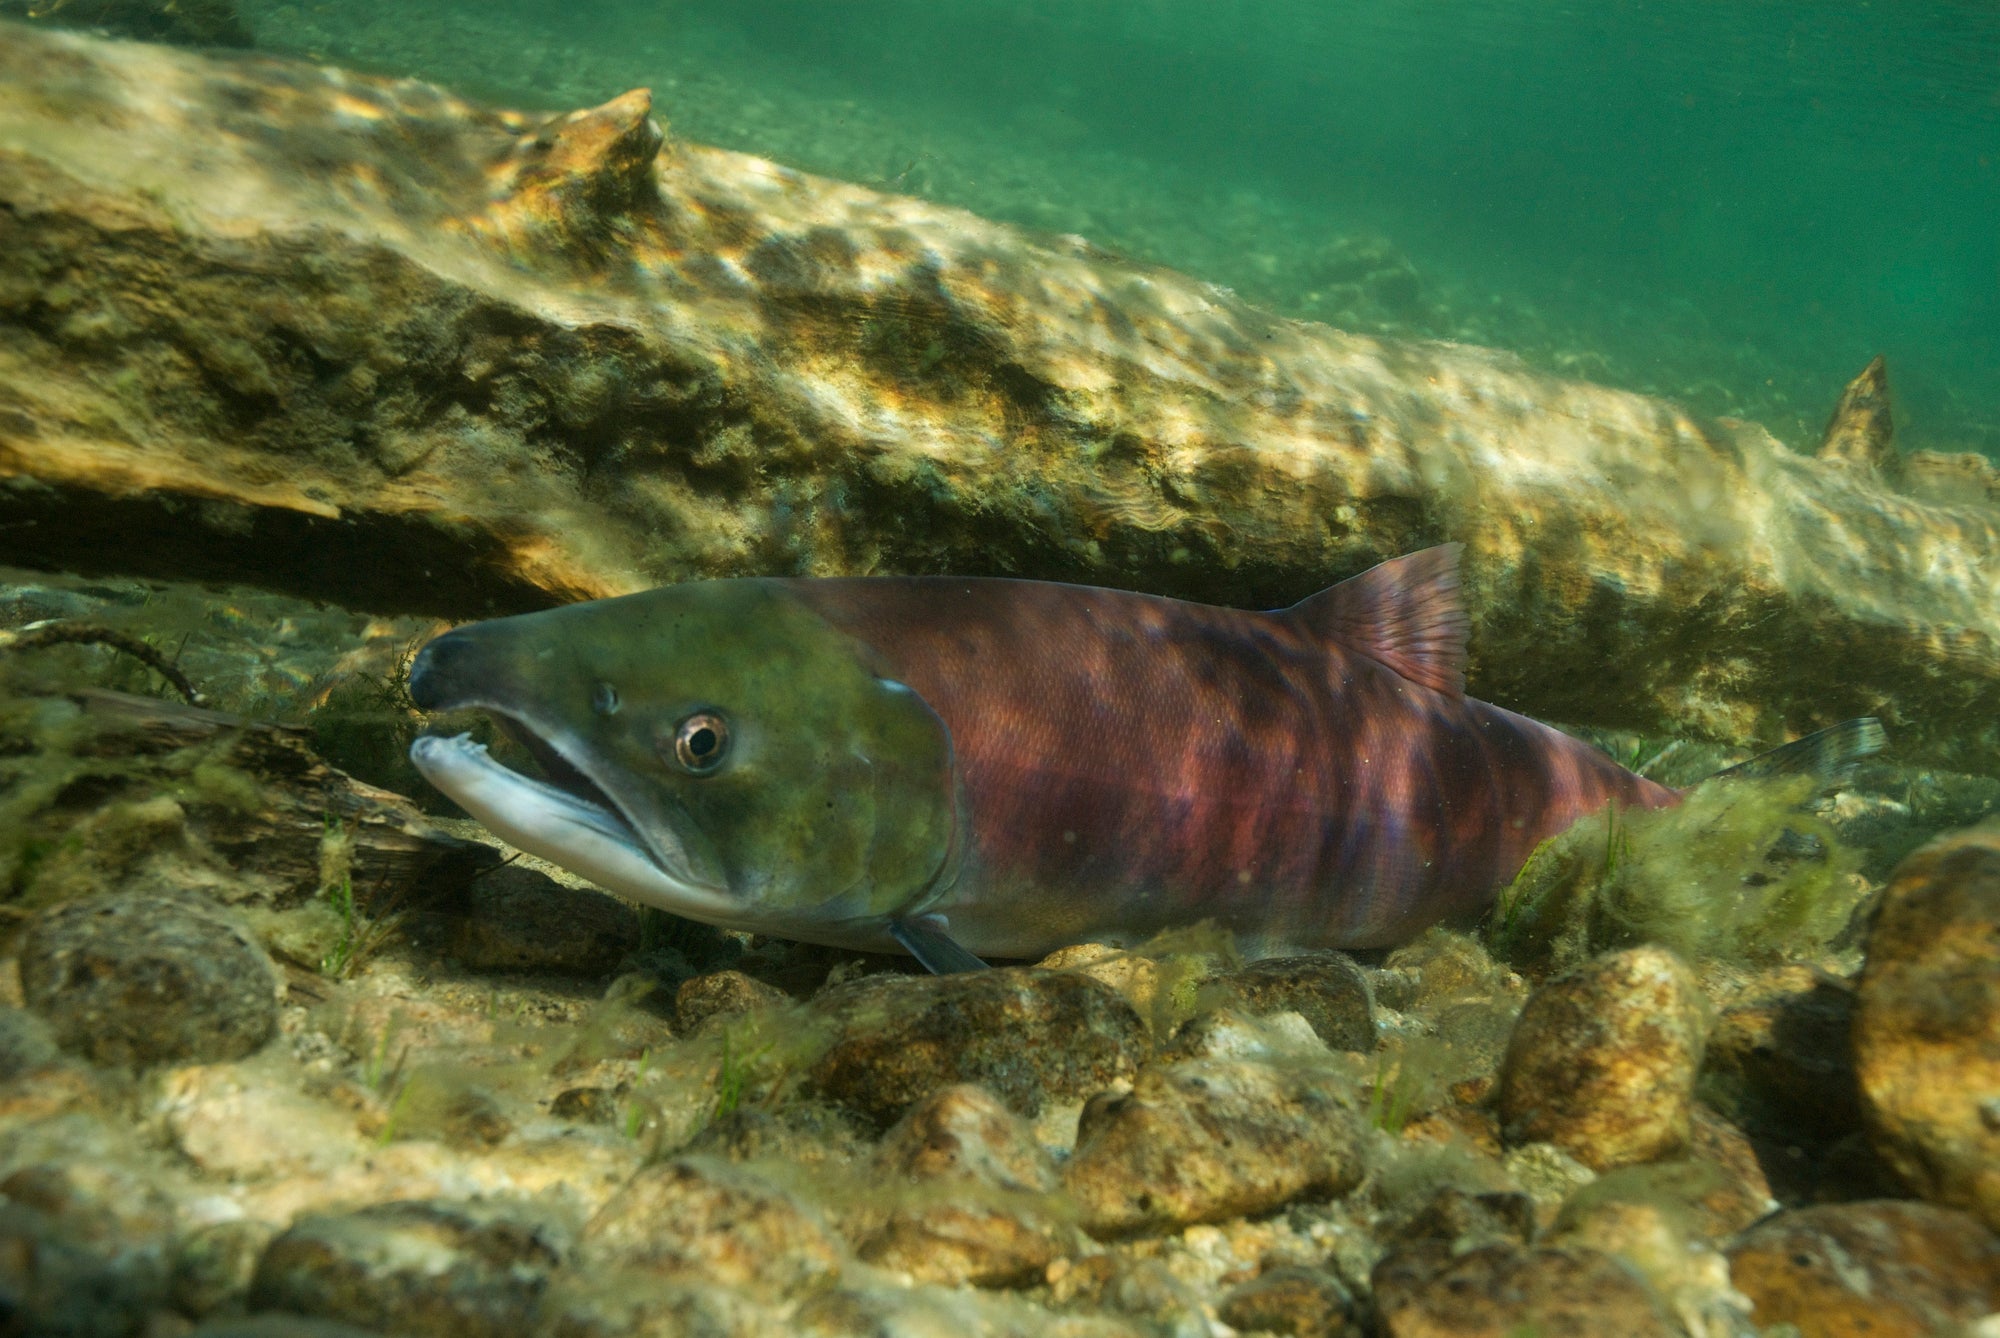 A salmon underwater, close to the camera.